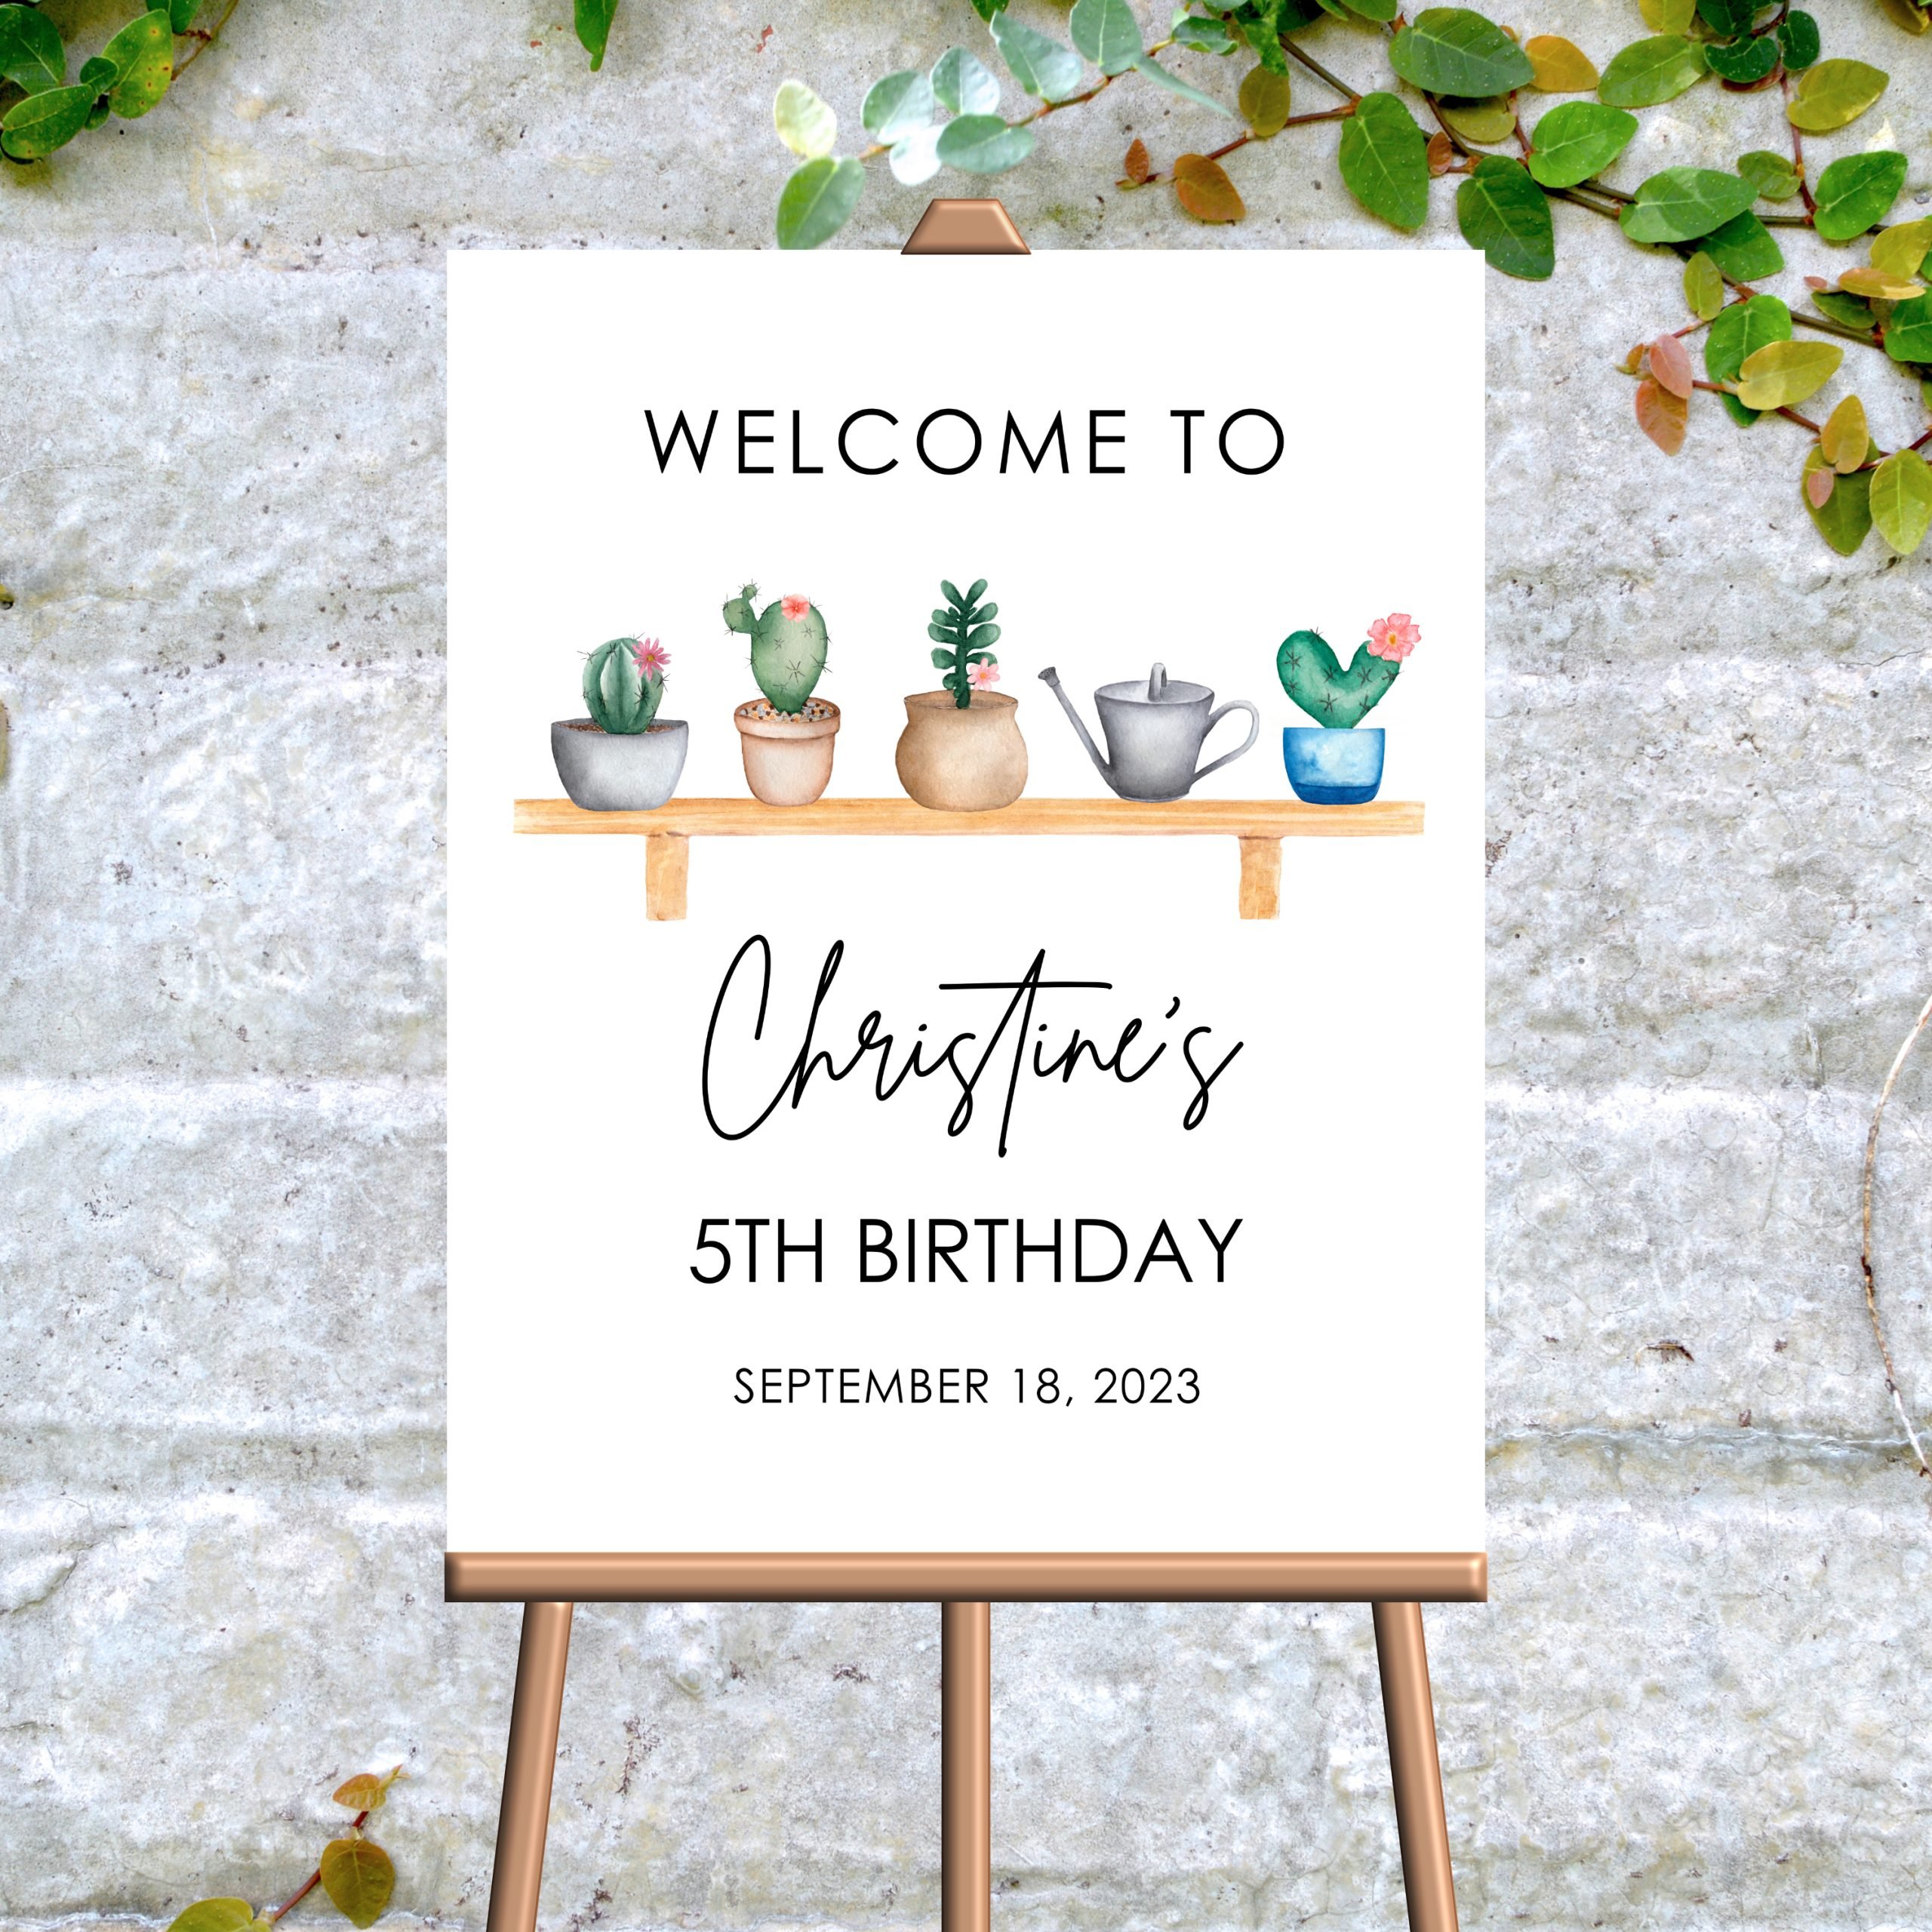 DECOR | SIGNS Editable Cactus Welcome Sign | Party Birthday Decor | Simple Minimalist Modern | Corjl Template | Digital Download | PRINTABLE birthday party decoration